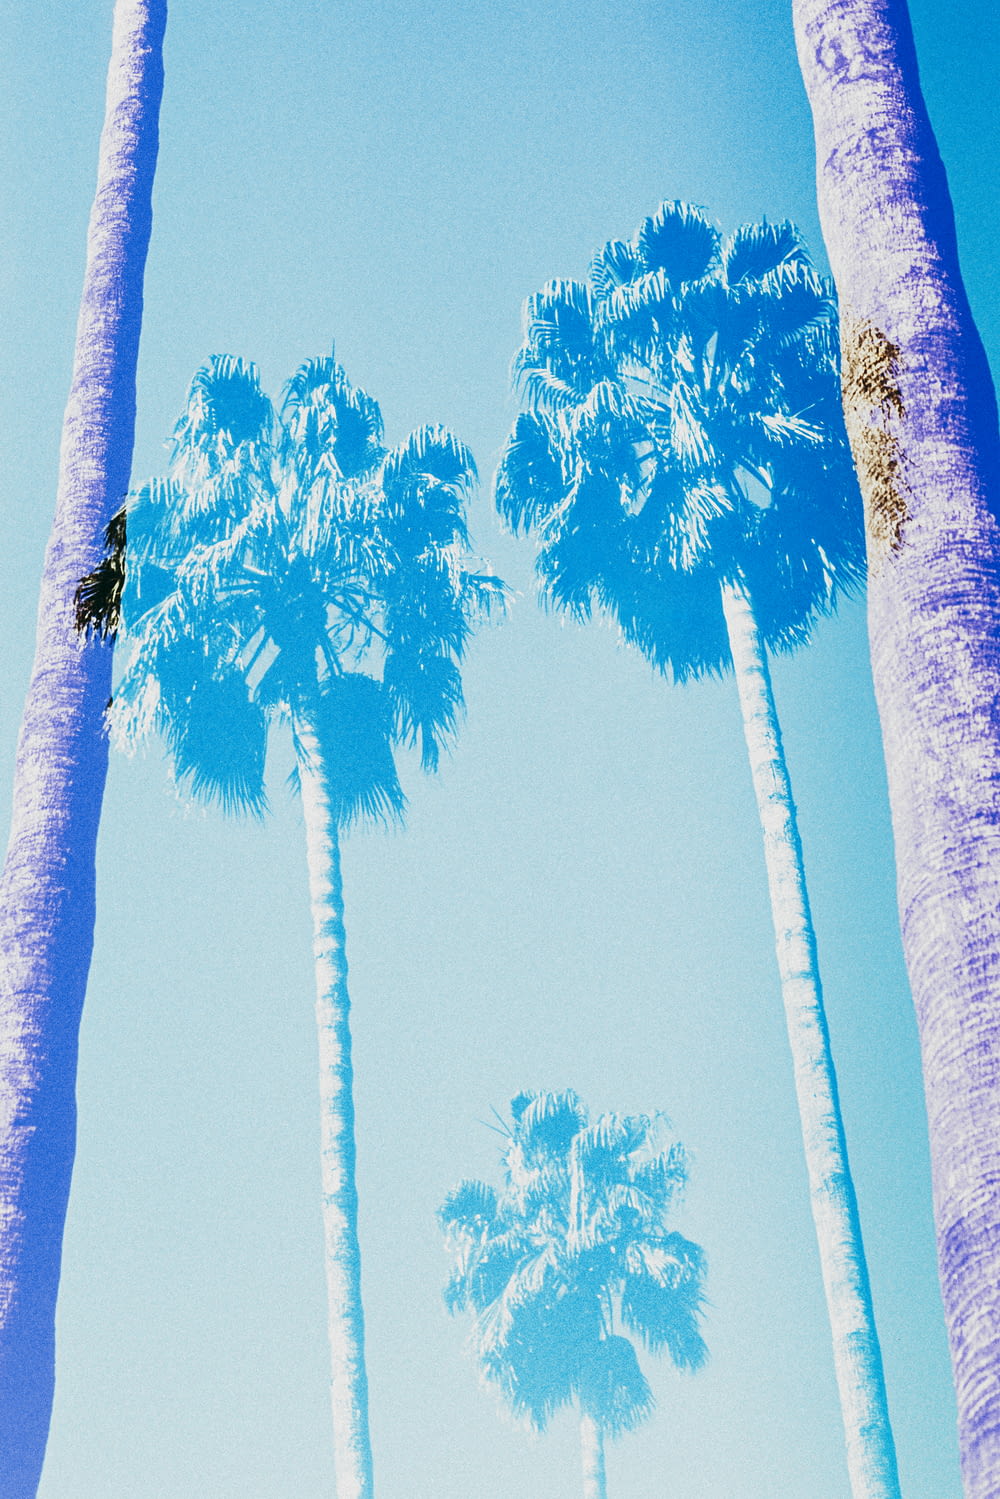 low angle photography of green palm trees under blue sky during daytime